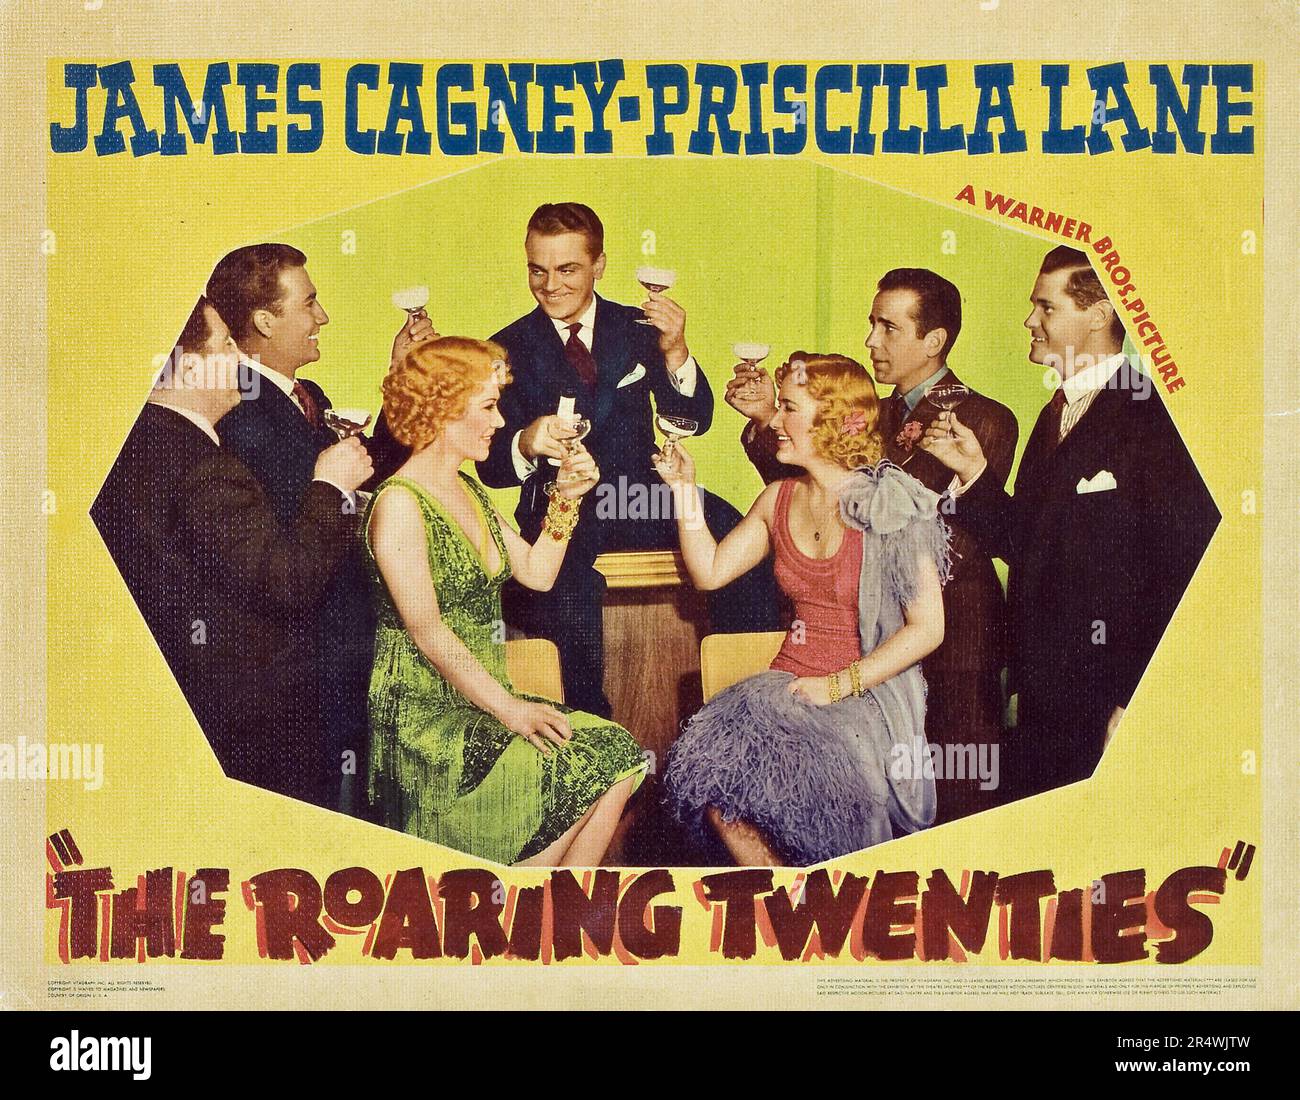 The Roaring Twenties, a 1939 crime thriller starring James Cagney, Priscilla Lane, Humphrey Bogart and Gladys George. The epic movie, spanning the periods between 1919 and 1933, was directed by Raoul Walsh Stock Photo